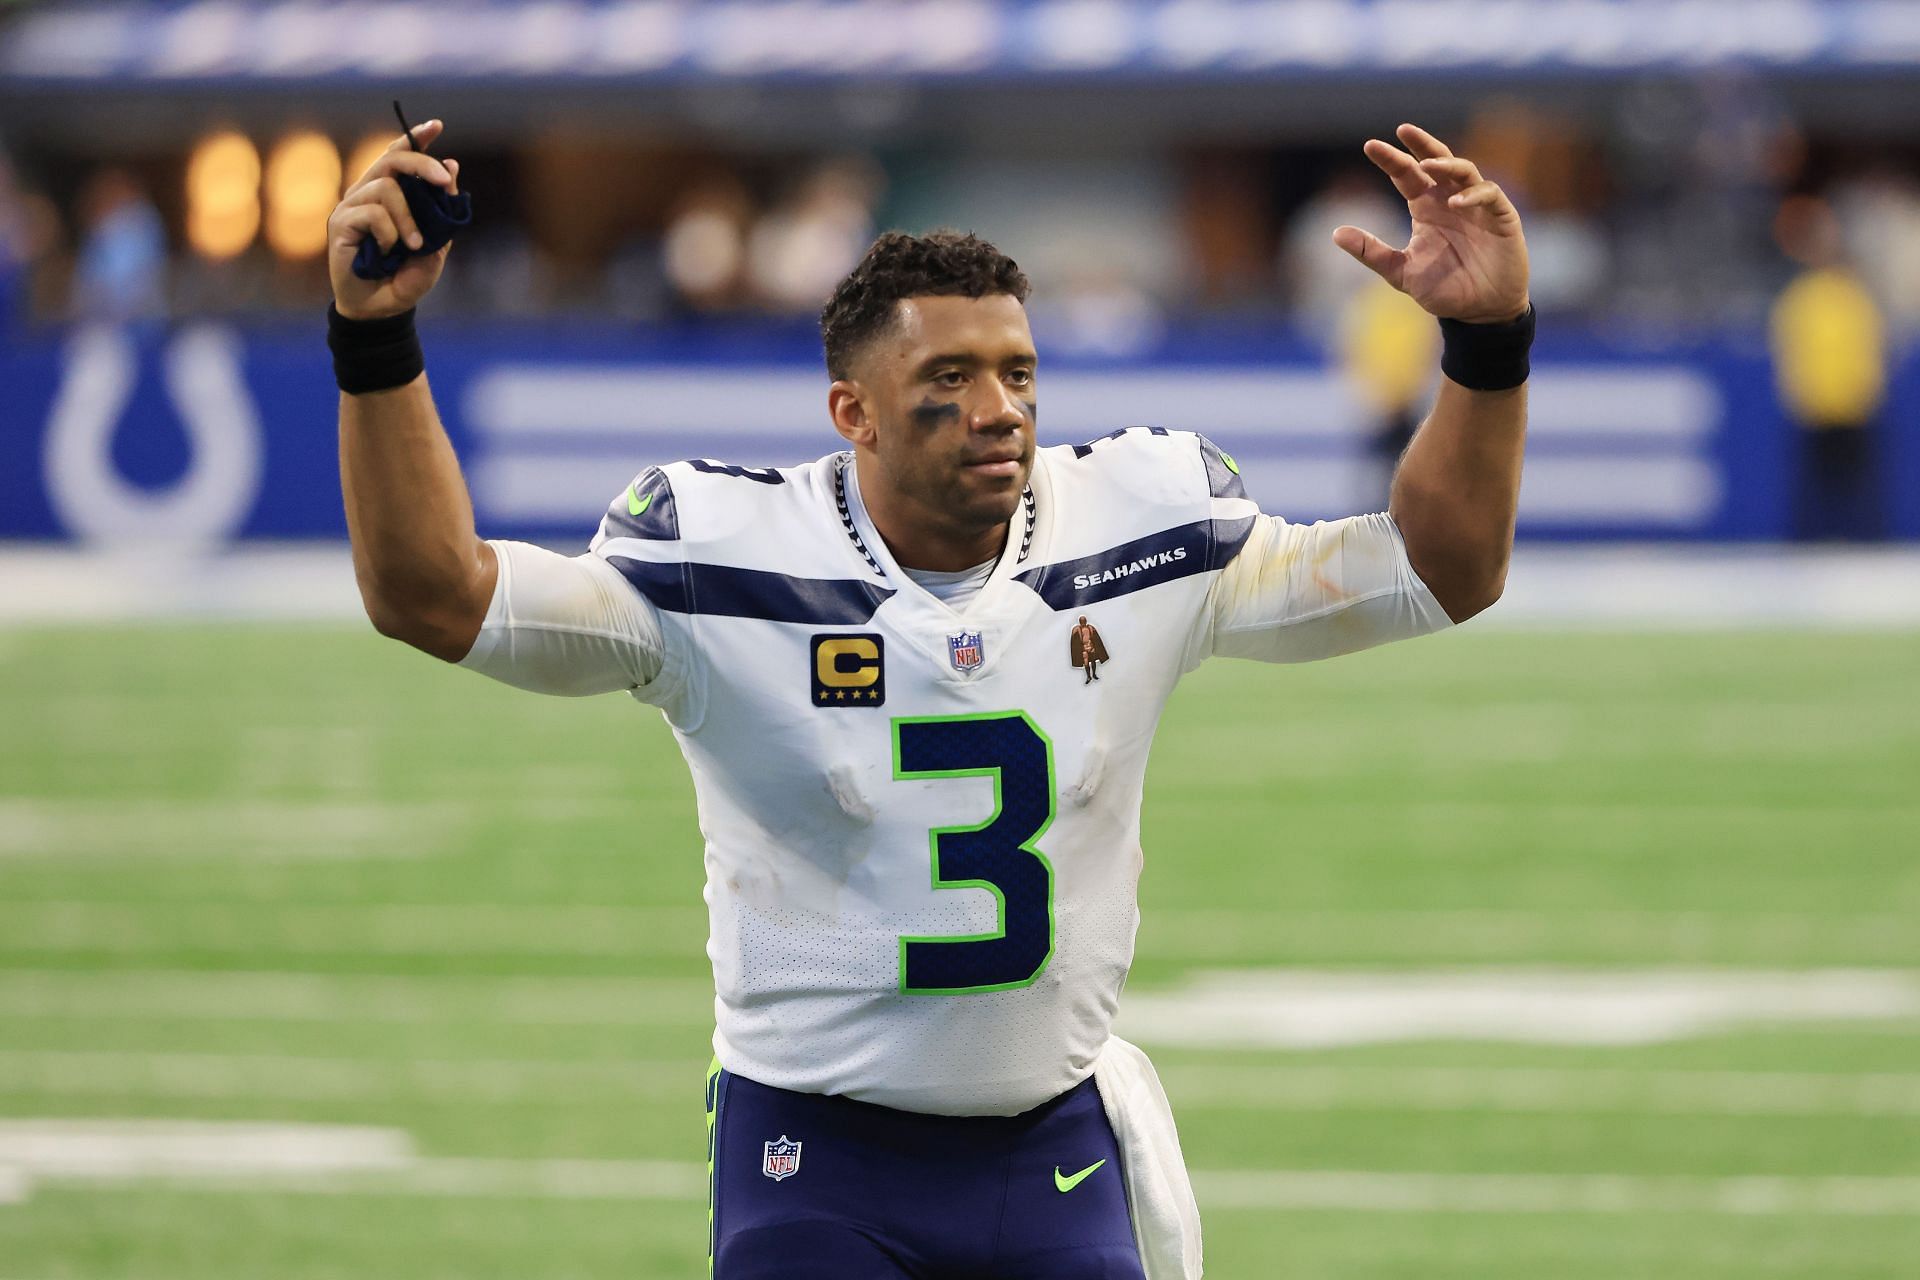 Russell Wilson in the Seattle Seahawks v Indianapolis Colts